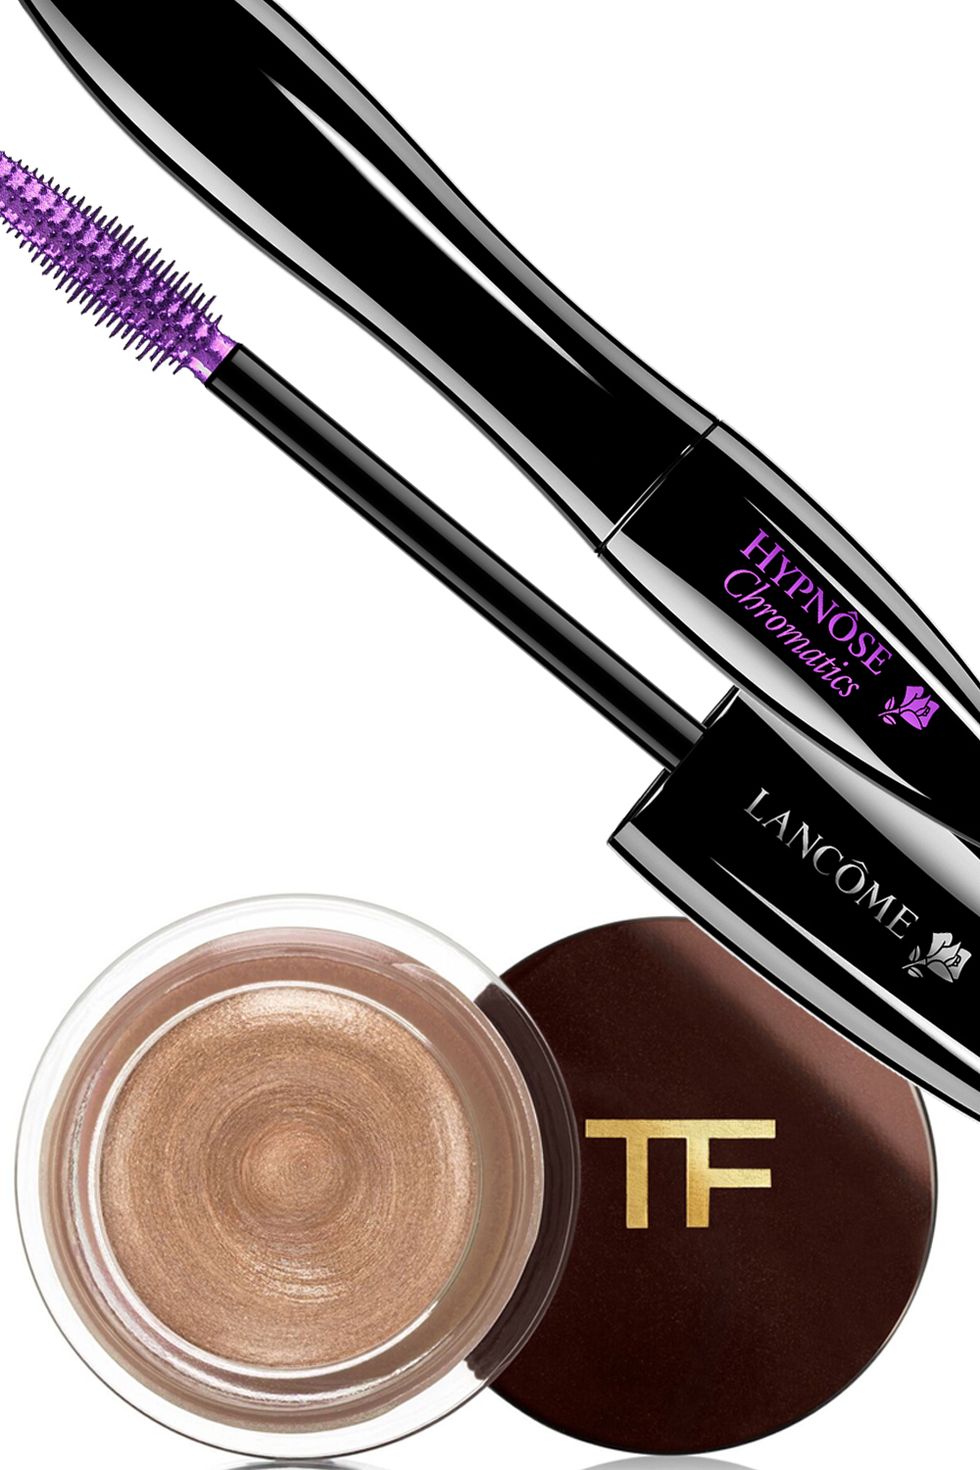 <p>If your dark brown eyes have even a pinch of a warm, golden undertone, you can count on gold shadow to bring it out and make them sparkle. Purple is your most flattering contrast shade for the lashes; go for ultraviolet to really electrify things, or play it subtle and earthy with a deep eggplant. </p><p><strong>Tom Ford </strong>Crème Color for Eyes in Opale, $45, <a href="http://www.tomford.com/cream-color-for-eyes/T43R.html?dwvar_T43R_color=OPALE"><u>tomford.com</u></a>; <strong>Lancôme </strong>Hypnôse Chromatics Mascara Top Coat in Amethyste, $28, <a href="http://www.lancome-usa.com/Hypn%C3%B4se-Chromatics/2000453,default,pd.html?utm_medium=cse_feed&utm_campaign=Makeup_Shop_by_Collection_NEW!_-_Parisian_Pop_Collection&utm_source=google&utm_content=Hypn%C3%B4se_Chromatics&cm_mmc=cse_feed-_-Makeup_Shop_by_Collection_NEW!_-_Parisian_Pop_Collection-_-google-_-Hypn%C3%B4se_Chromatics&LGWCODE=2000453;106713;6271&gclid=CjwKEAiA04S3BRCYteOr6b-roSUSJABE1-6BENXjKxSsKOAs3MvKTmnyaxF-mUzU-N9rOftcltjgkRoC5T_w_wcB" target="_blank">lancome-usa.com</a>. <span class="redactor-invisible-space"></span></p>